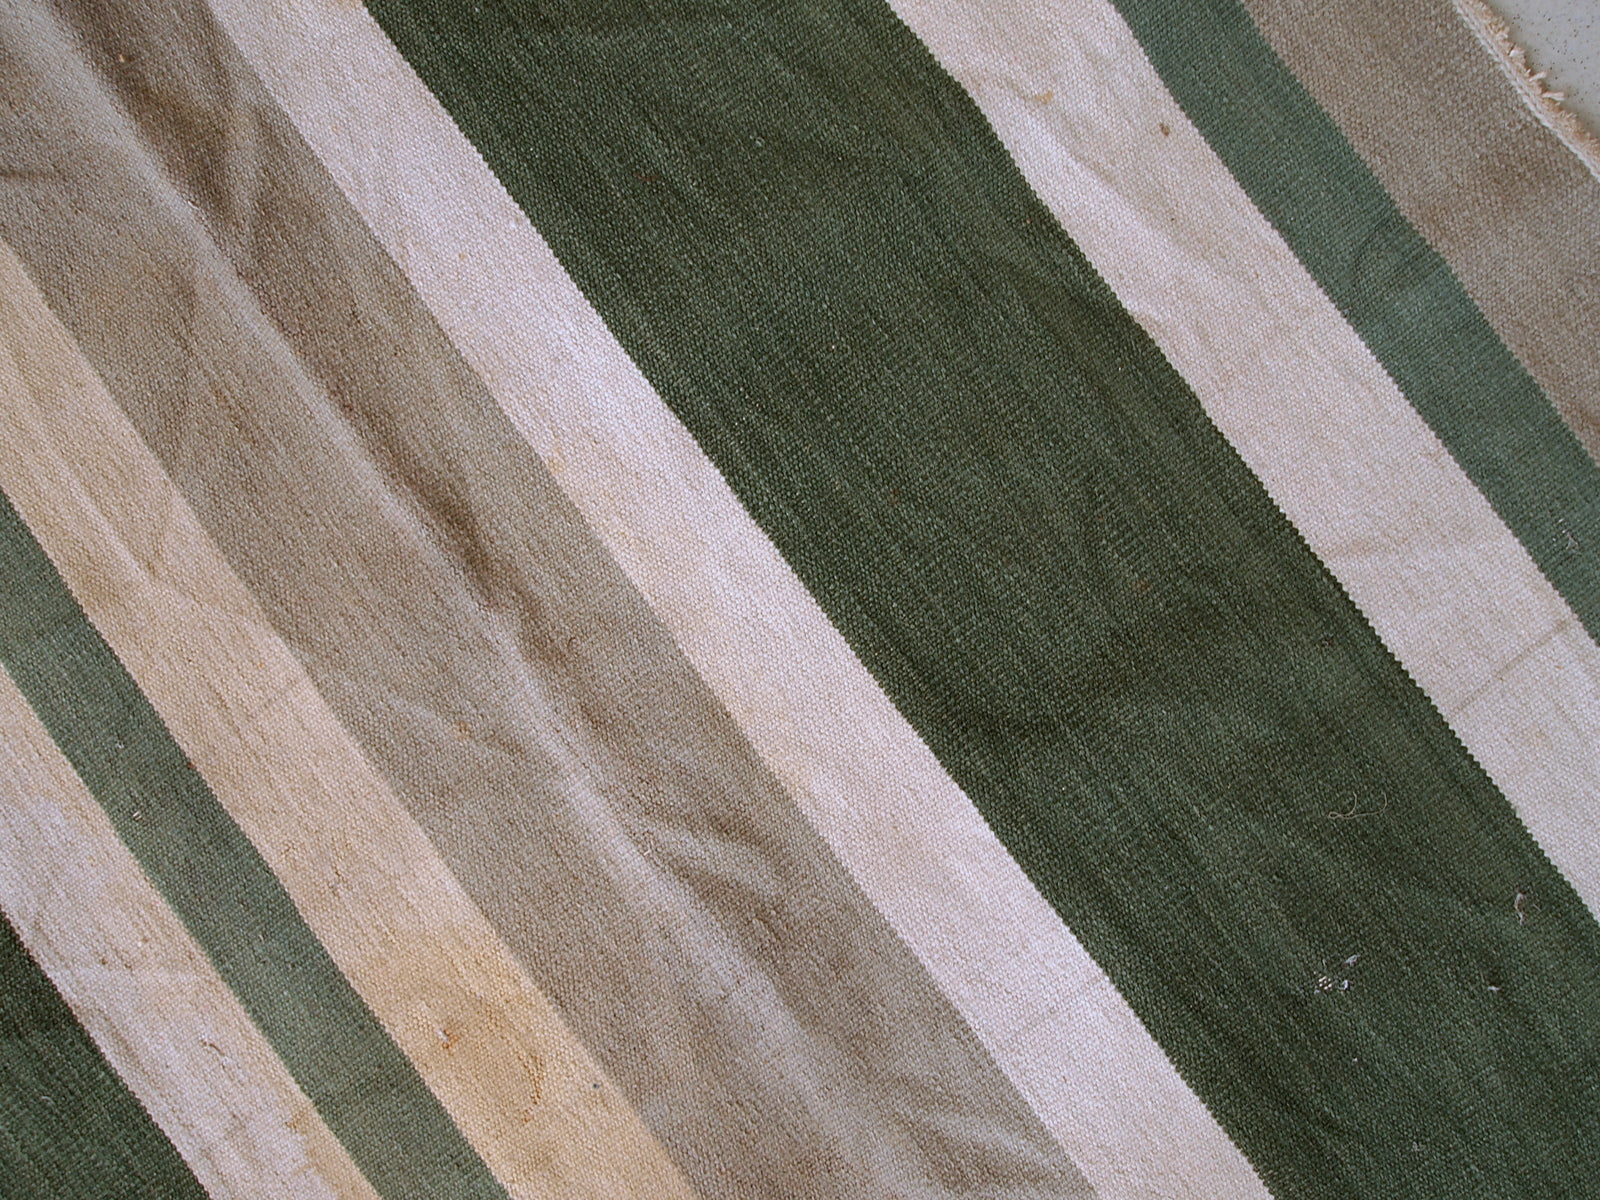 This kilim has very simple stripes motive in dark green, white and grey shades. It is in original condition from the beginning of 20th century, has some stains.